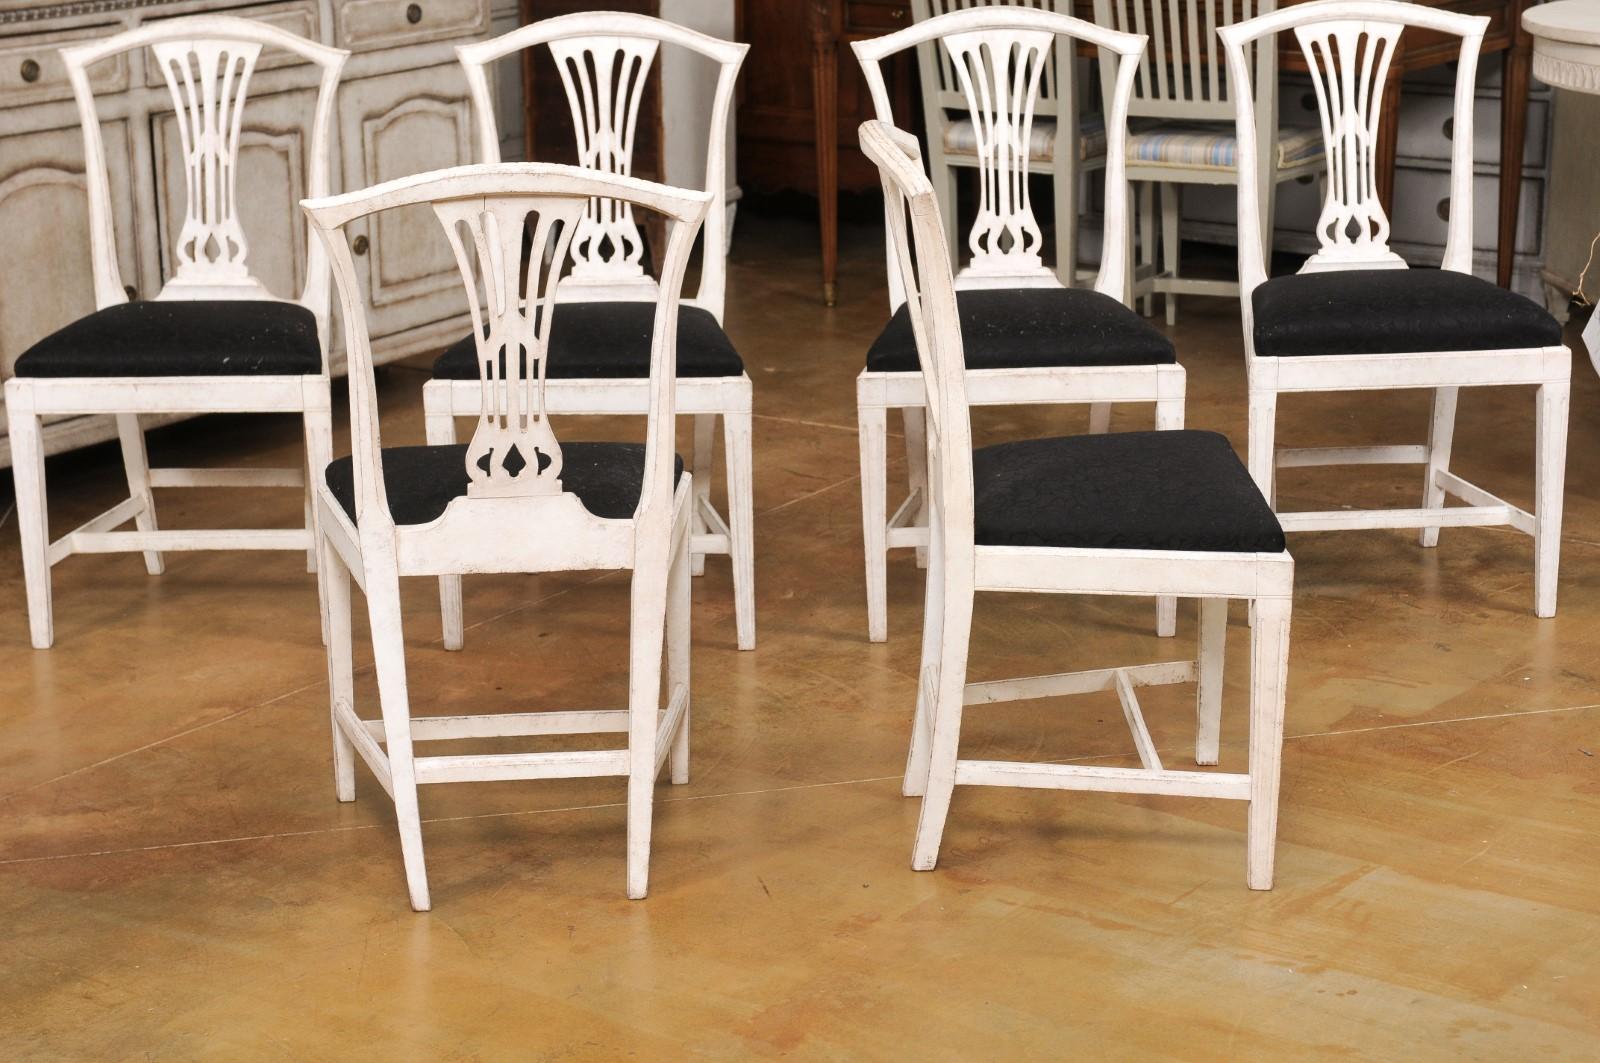 Set of Six Swedish 1890s Painted Wood Dining Room Side Chairs with Black Fabric For Sale 1